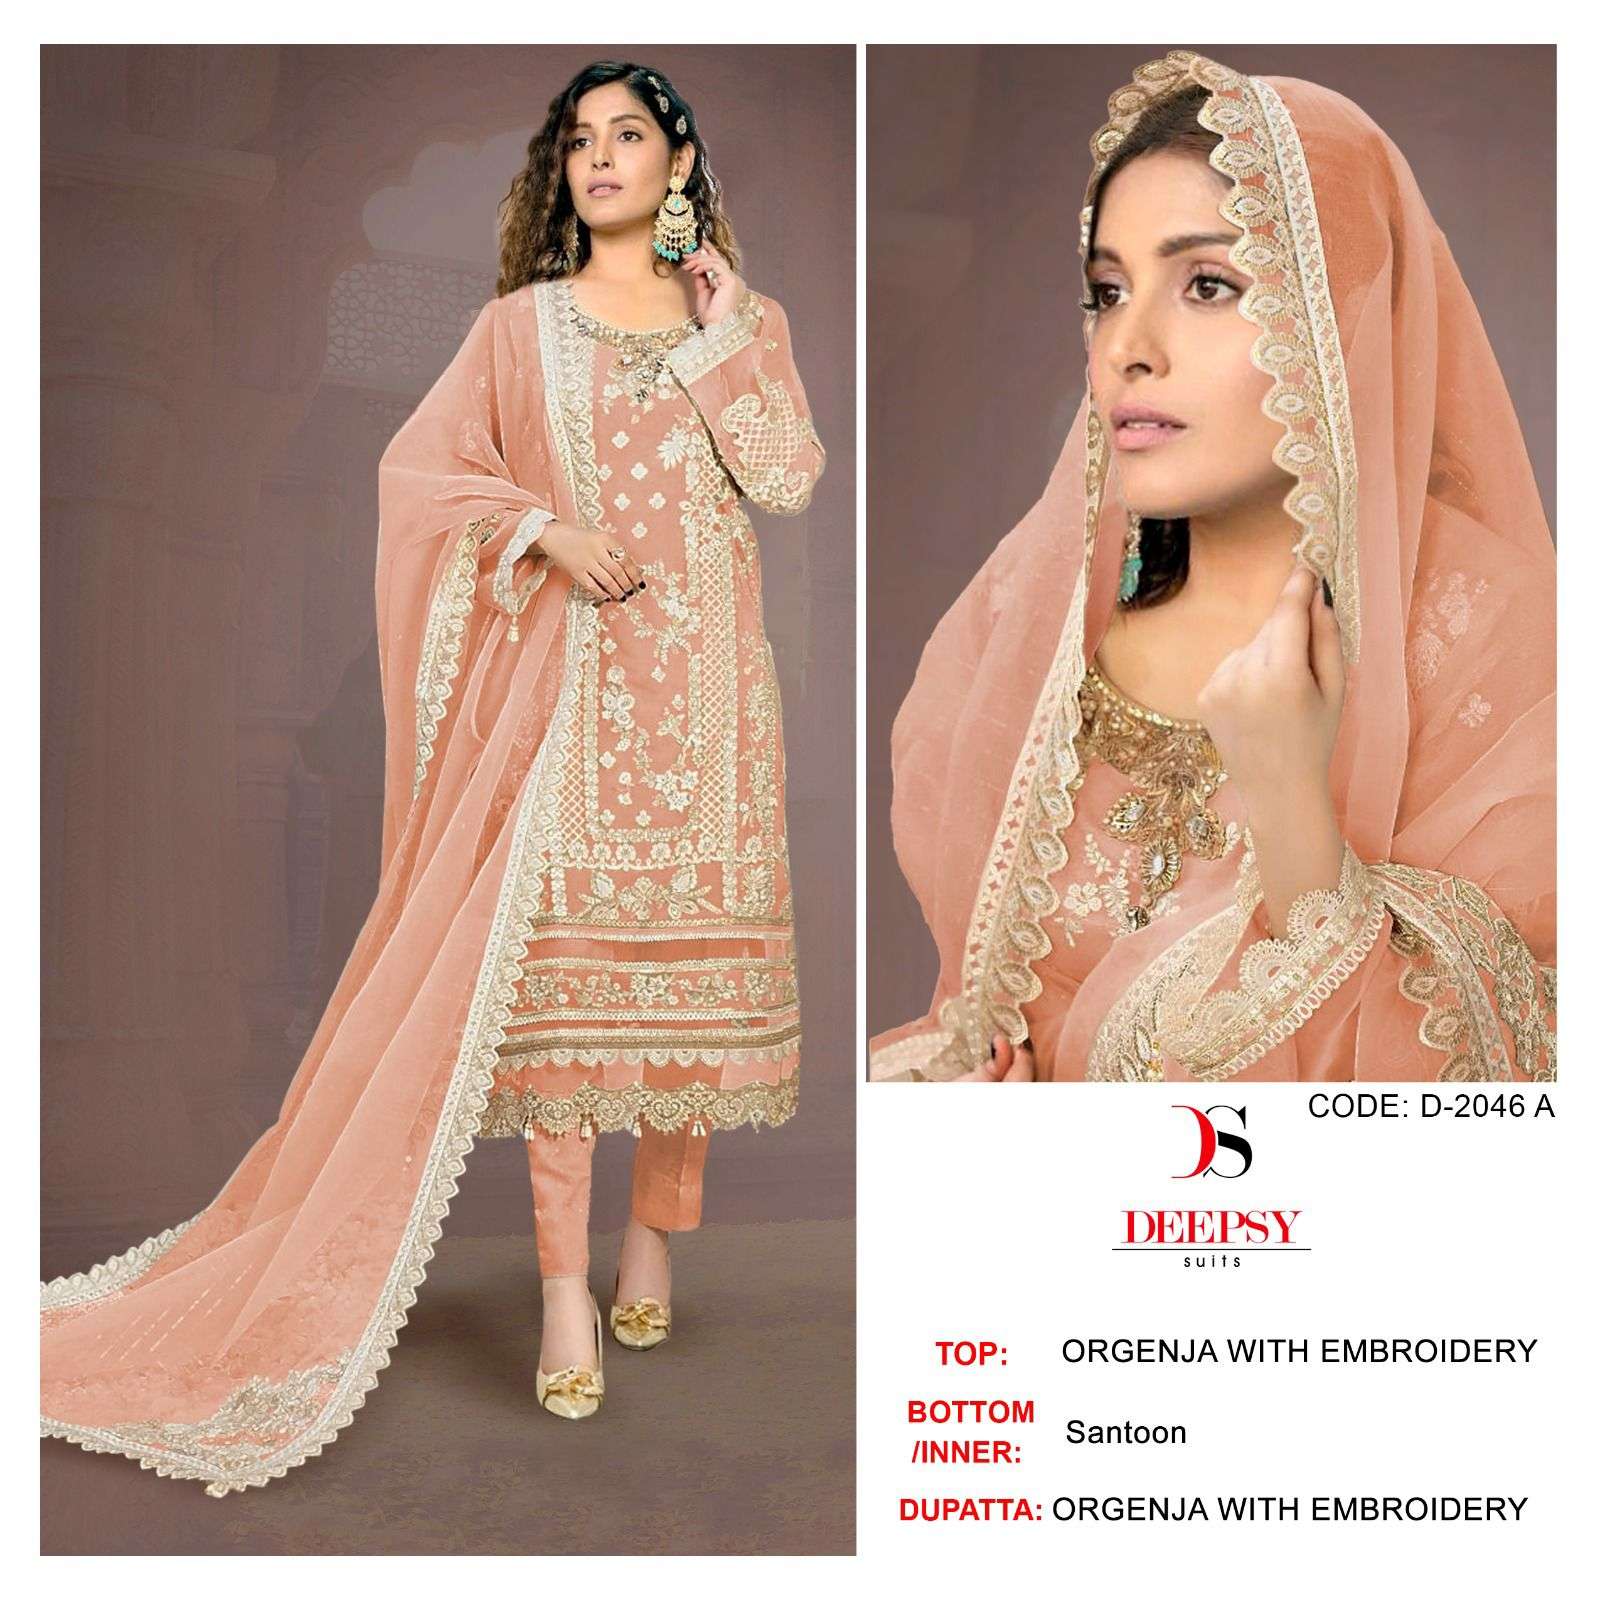 Deepsy suits 2046 Organza With Embroidery work Pakistani sal...